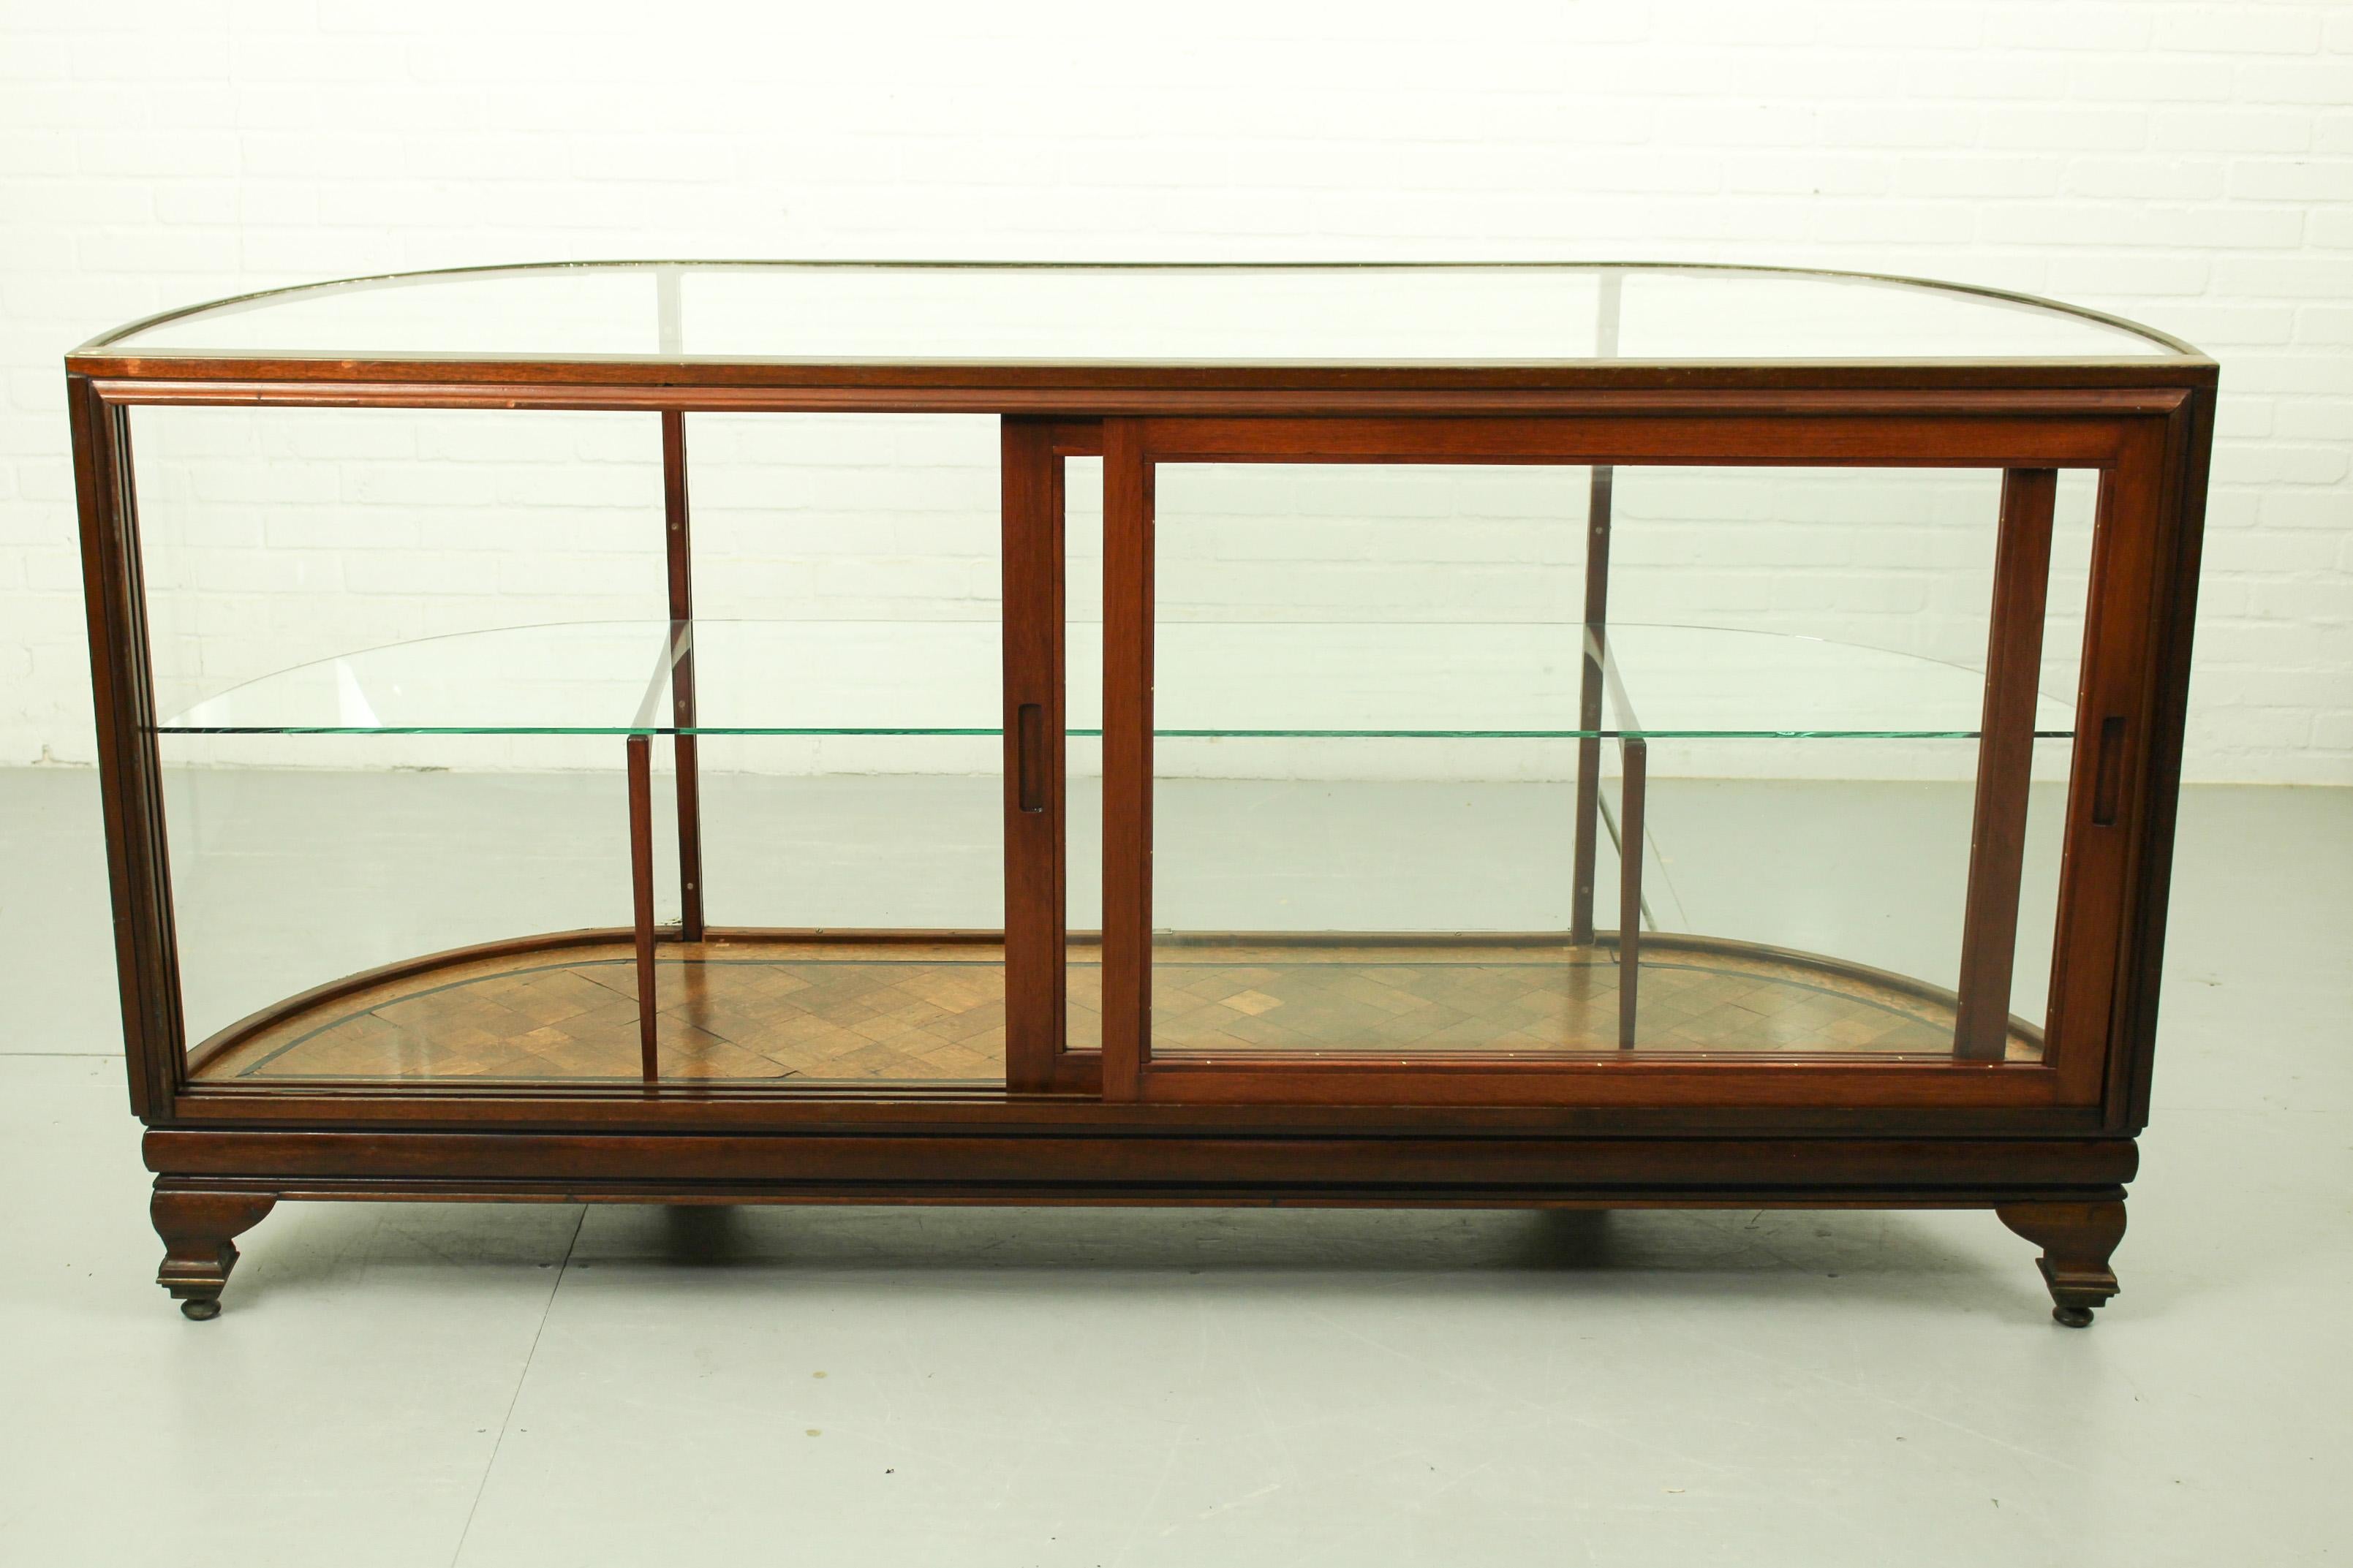 British Antique Mahogany and Brass Shop Counter by Pollards, 1920s